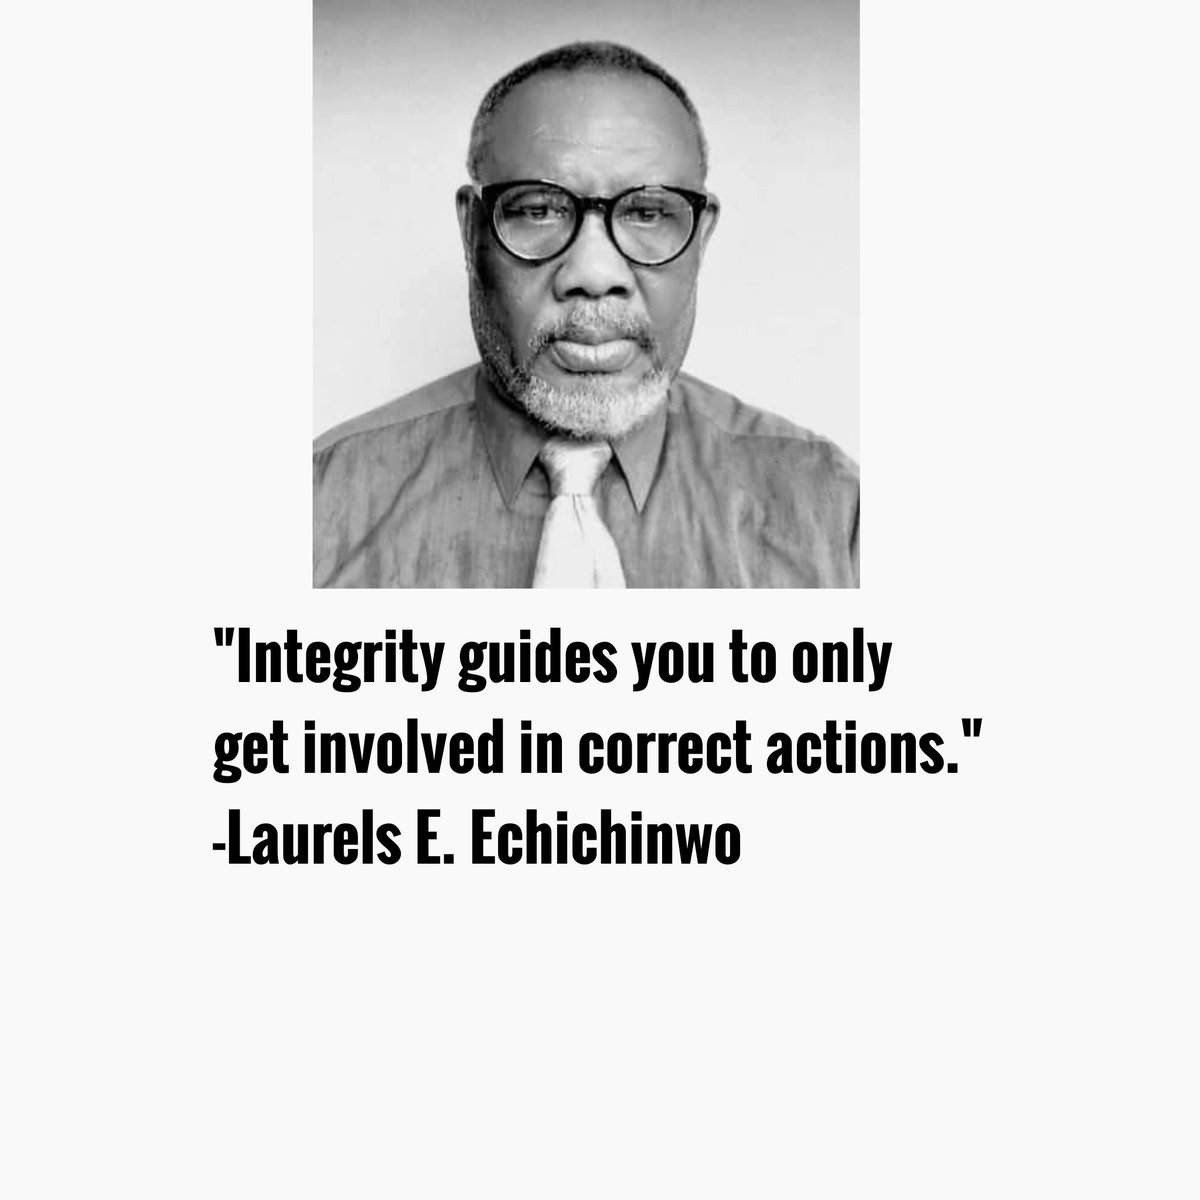 'Integrity guides you to only get  involved in correct actions.' -Laurels E. Echichinwo 
#laurelsechichinwoinspirationalquotes